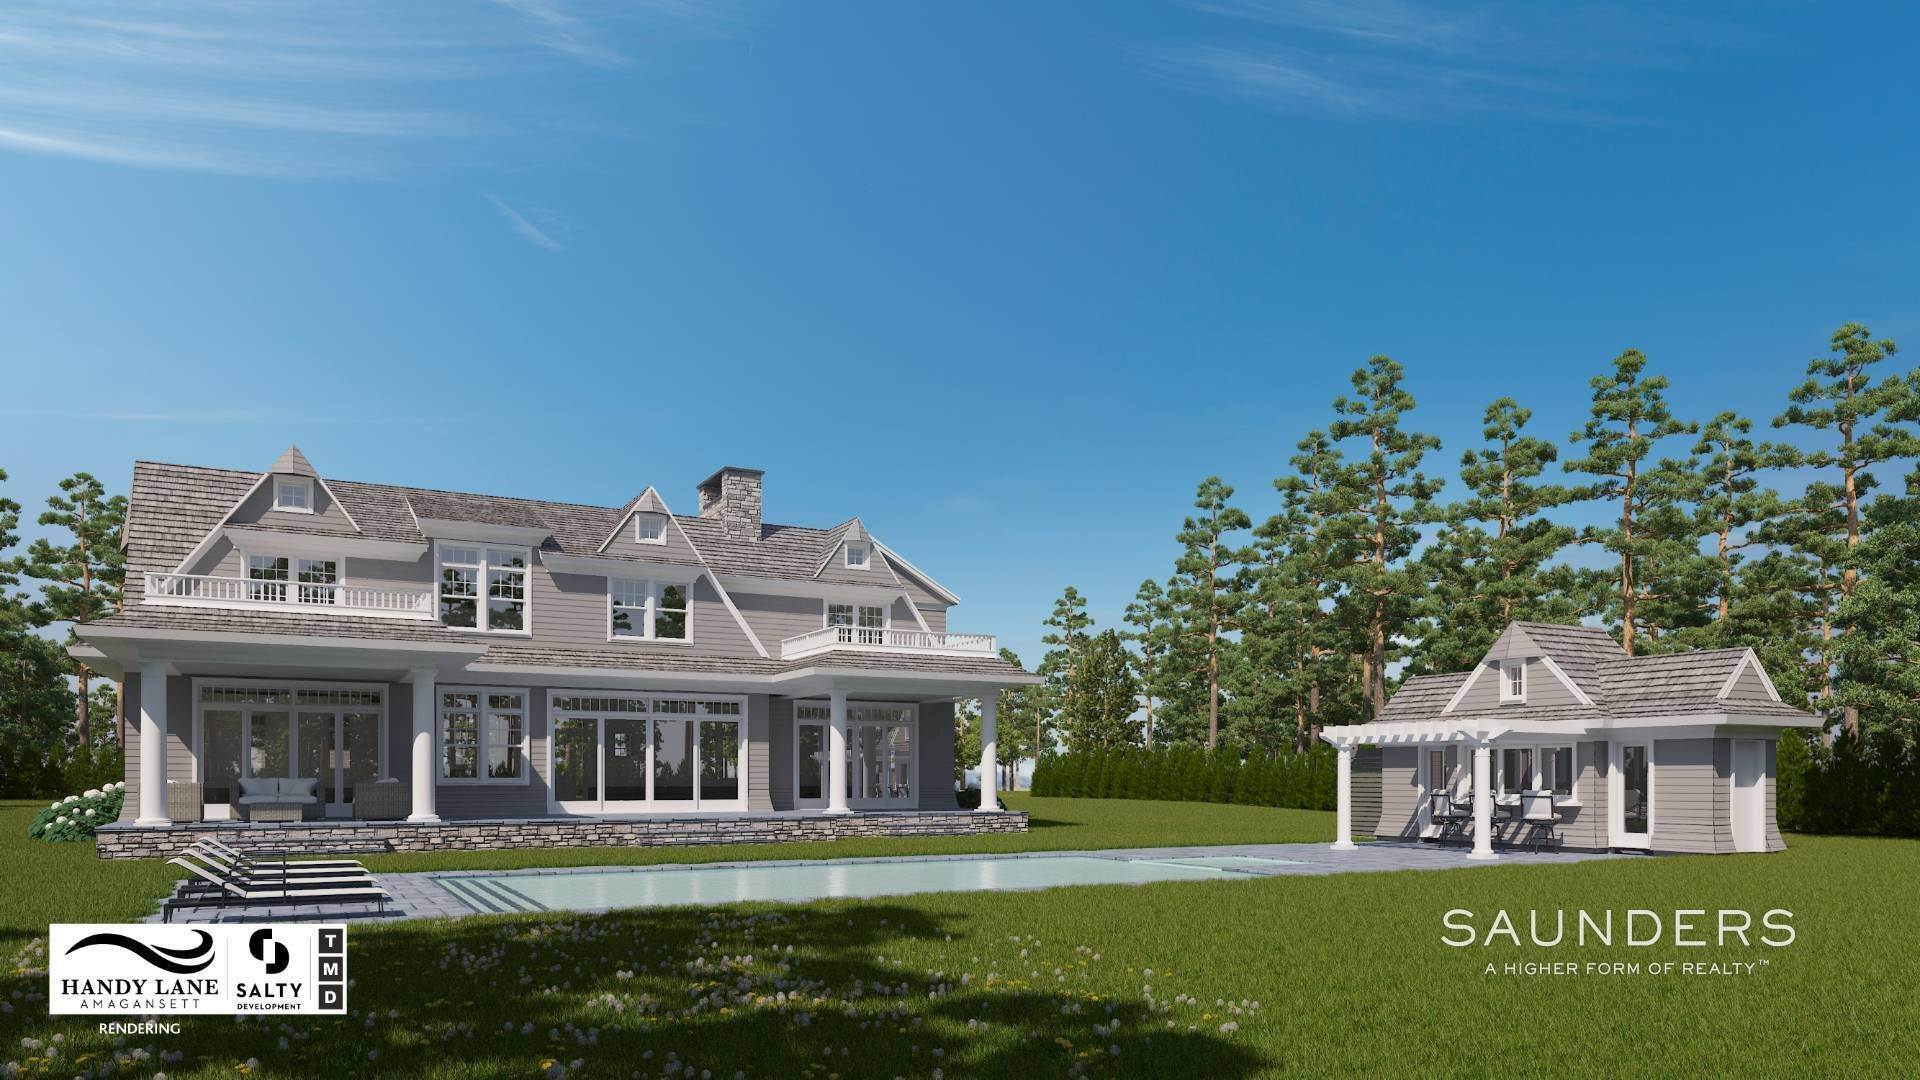 2. Single Family Homes for Sale at Amagansett South Of The Highway- New Construction 39 Handy Lane, Amagansett, NY 11937